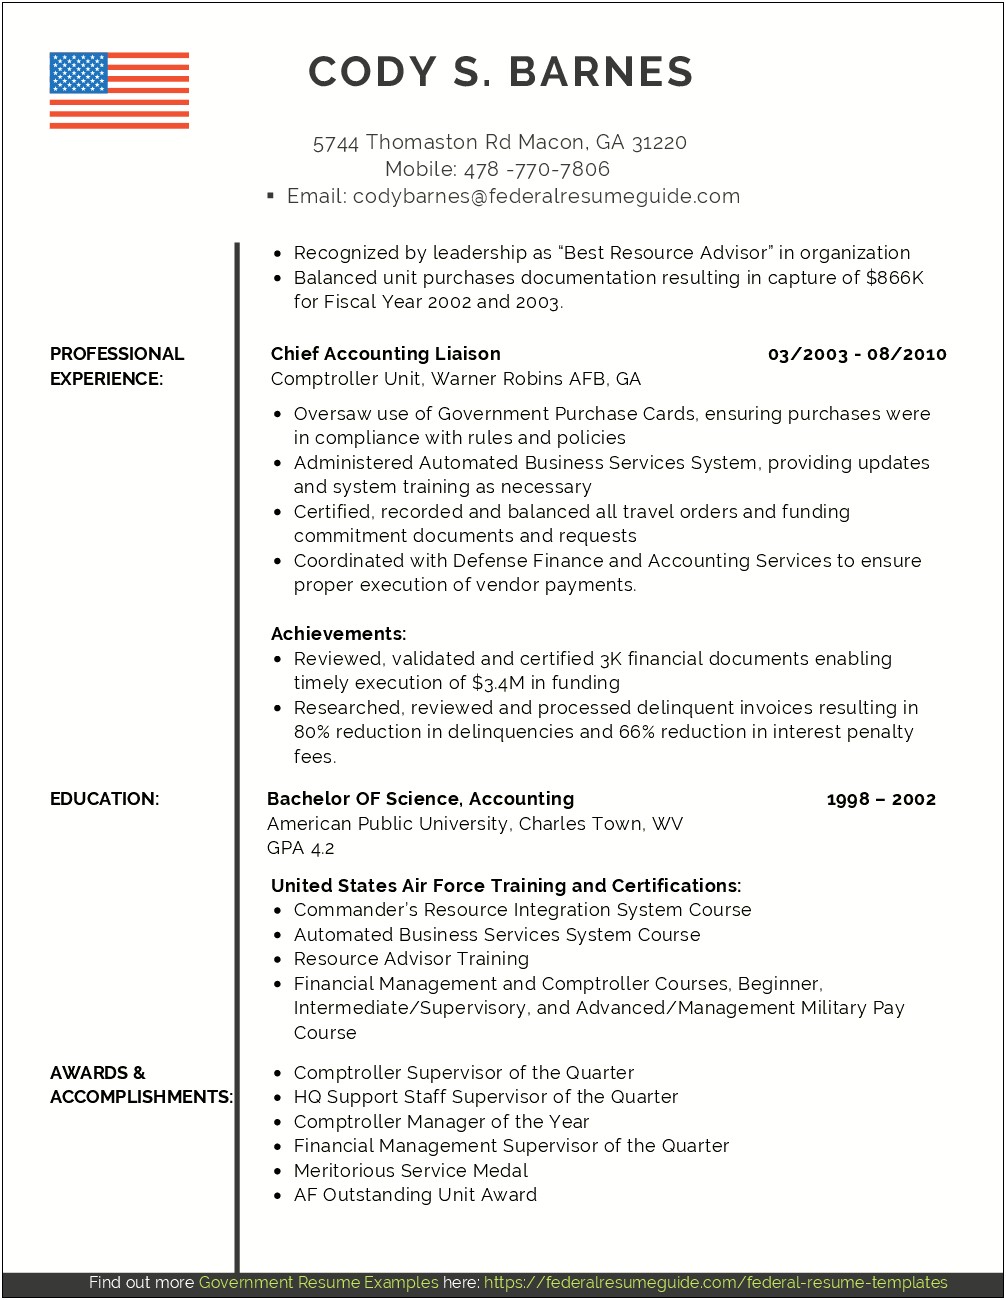 Militray Experience On Resume Sample